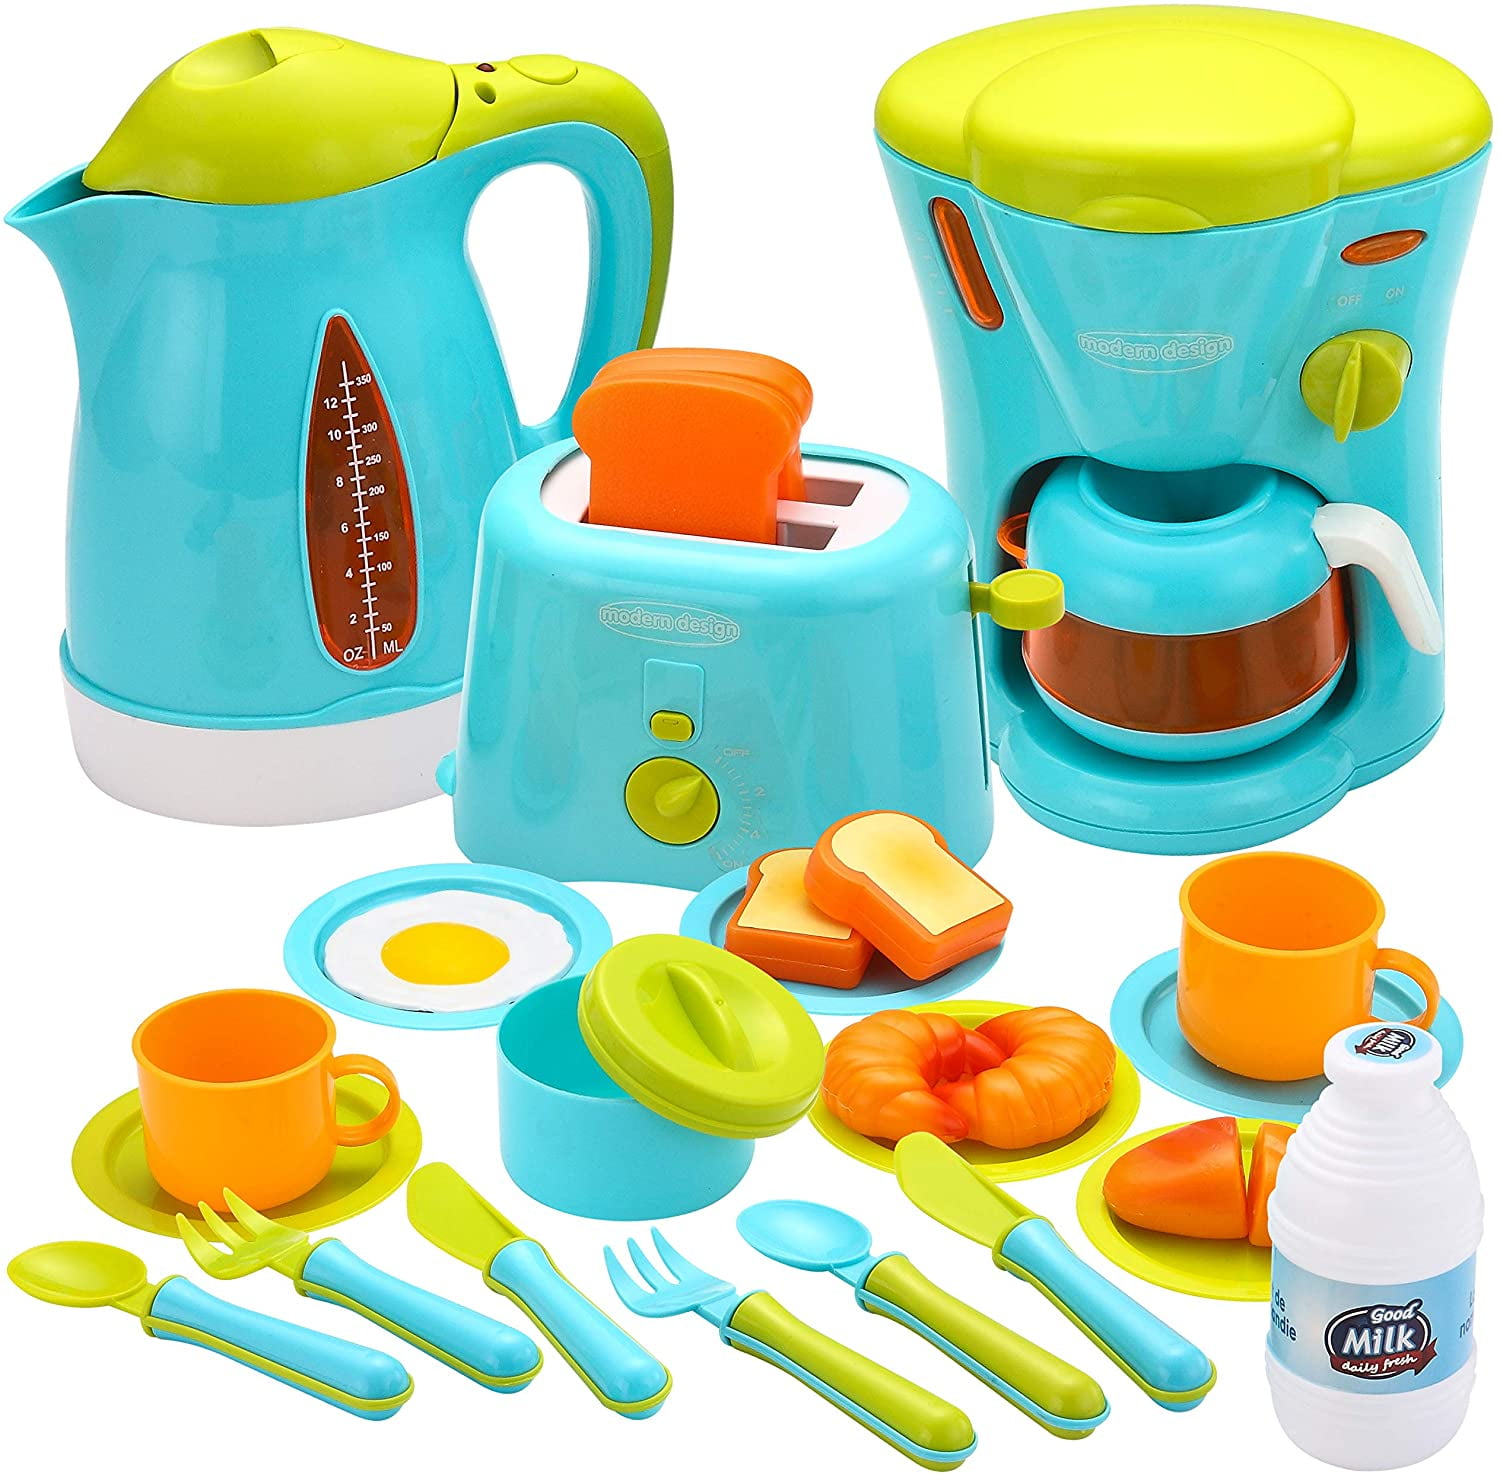 Kids Kettle and Toaster Toy Electronic Pretend Play Kitchen Appliance with Pop up Sounds My First Bread Slices Set for Toddlers infunbebe Jeeves Jr 